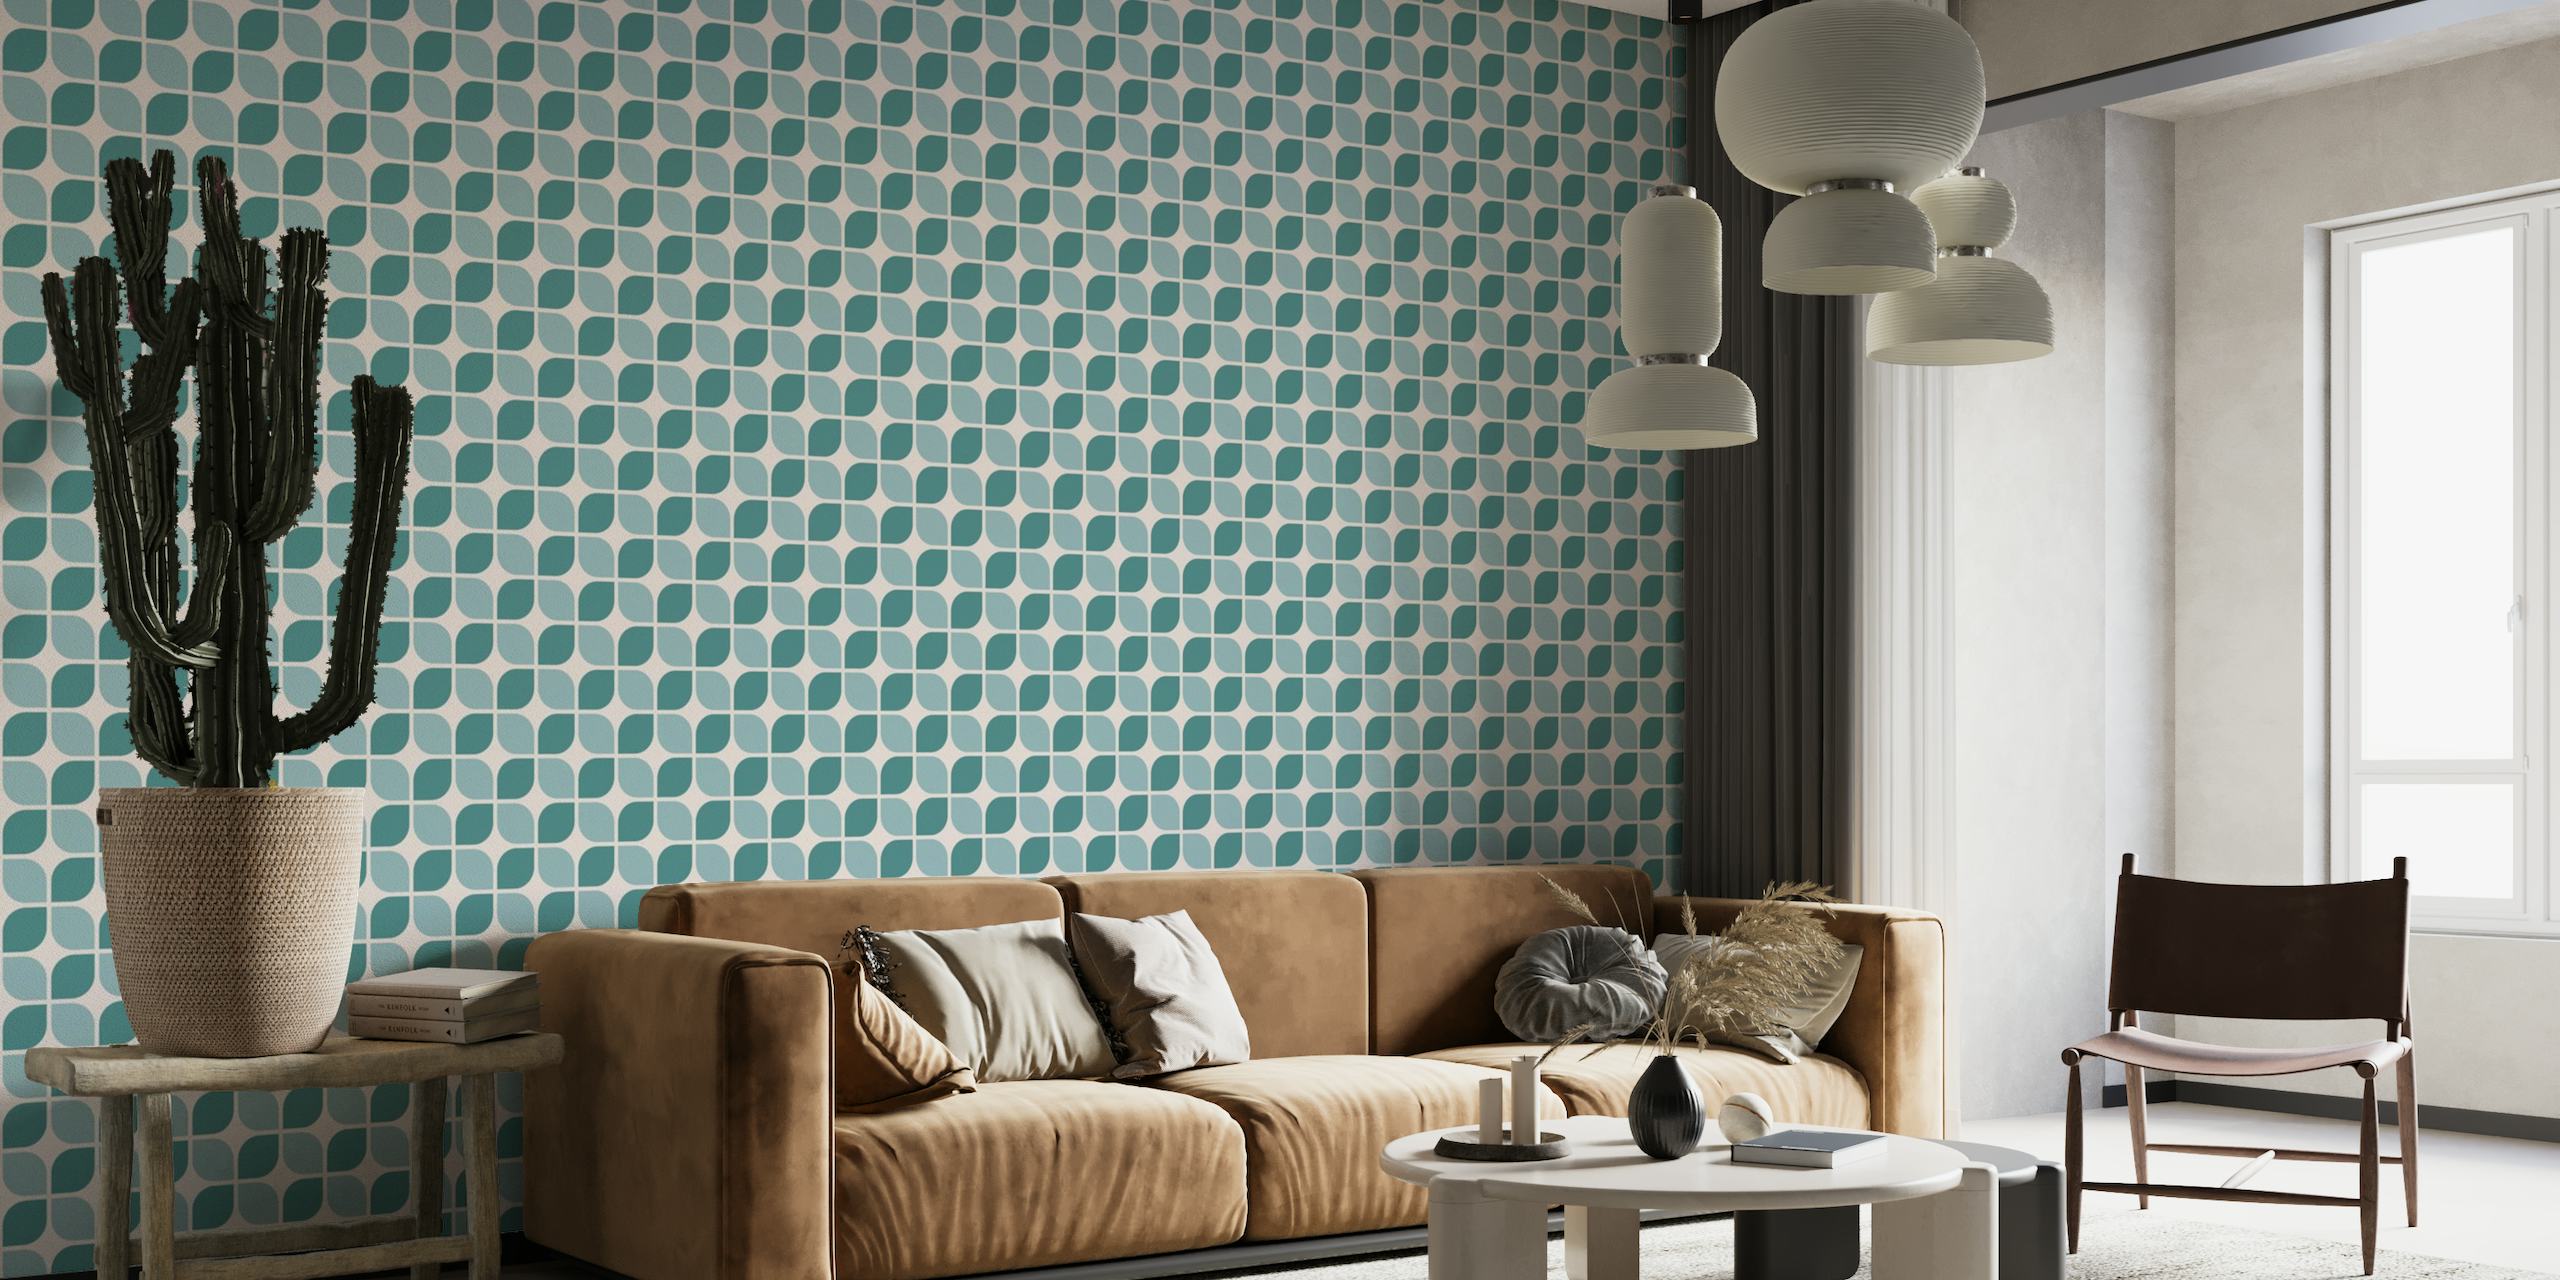 Retro Shapes Pattern Teal Turquoise tapete